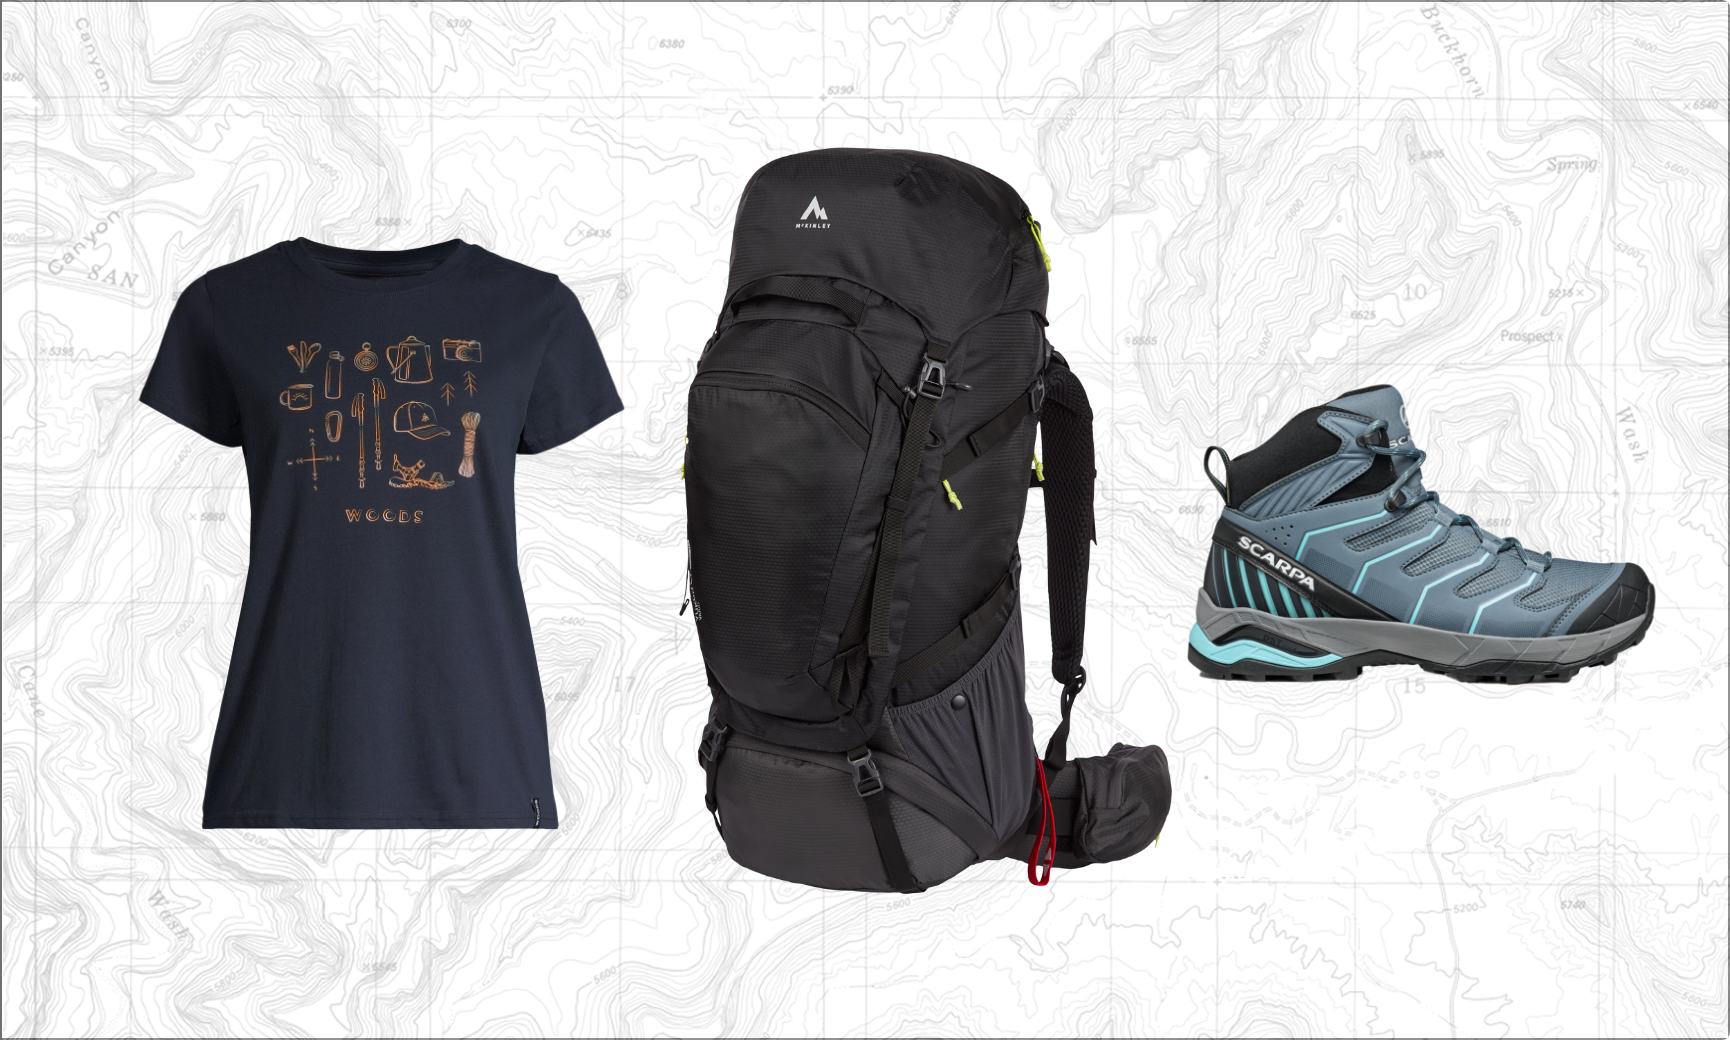 Shop the Get Outdoors Event